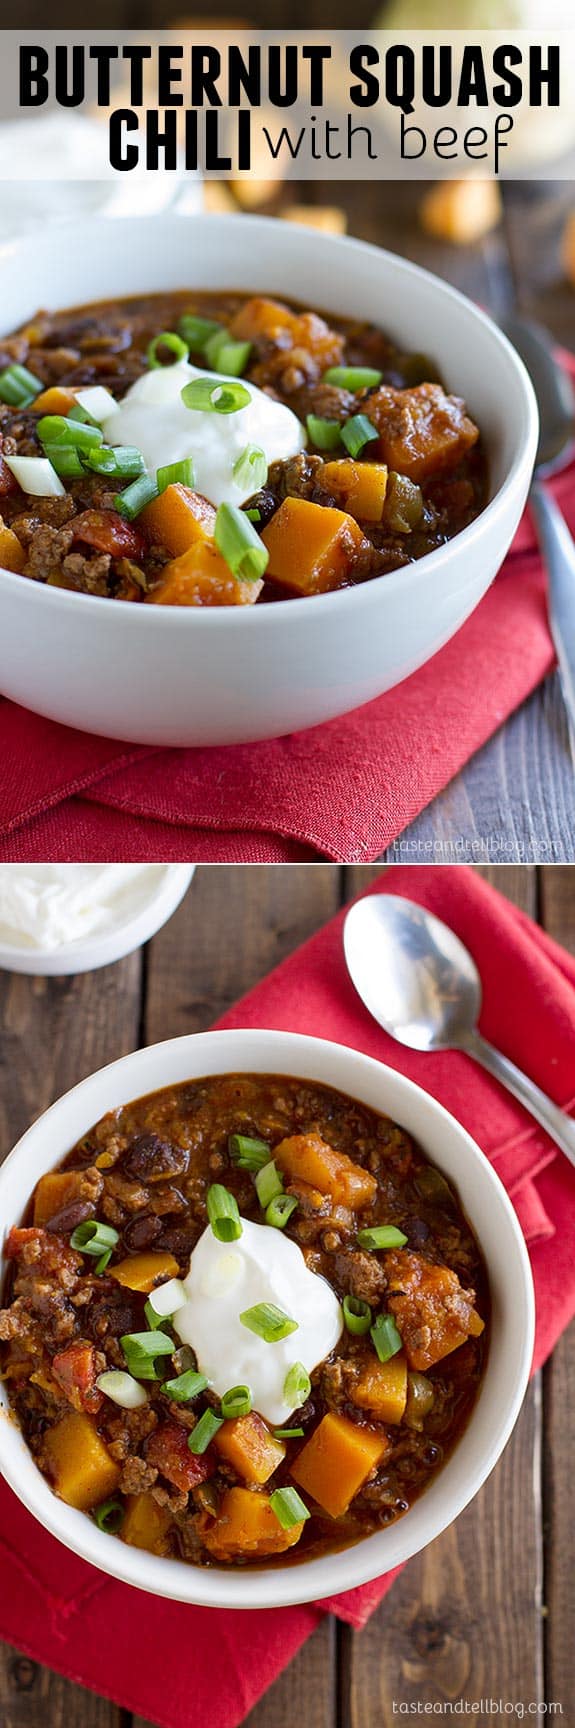 Butternut Squash Chili with Beef - Butternut squash, black beans, and ground beef star in this flavor packed Butternut Squash Chili with Beef.